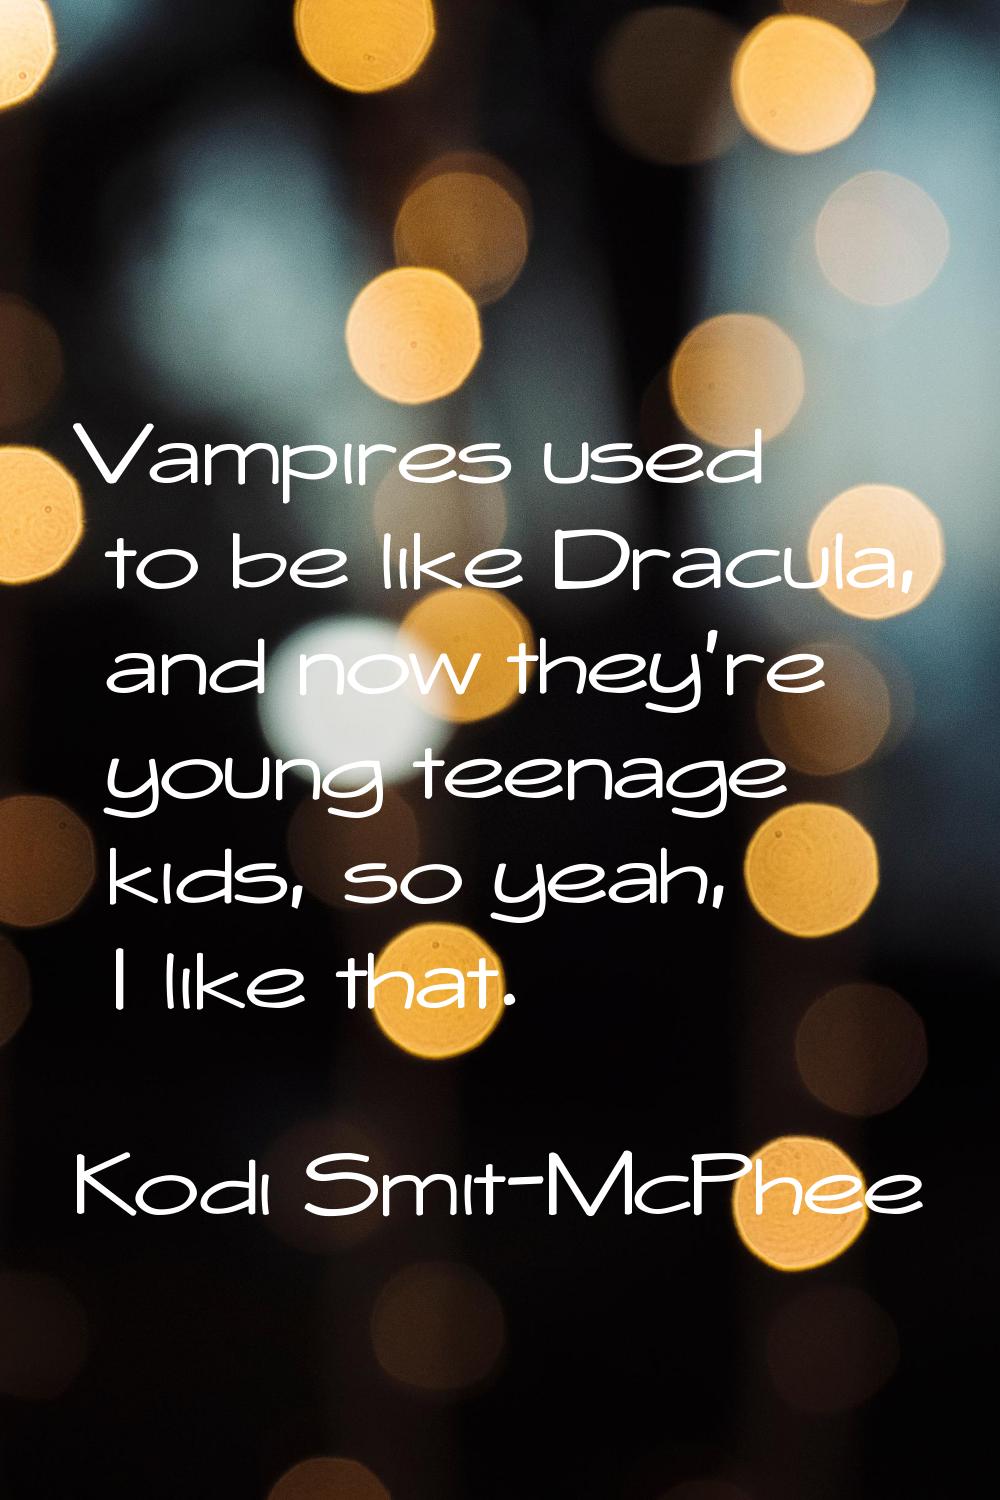 Vampires used to be like Dracula, and now they're young teenage kids, so yeah, I like that.